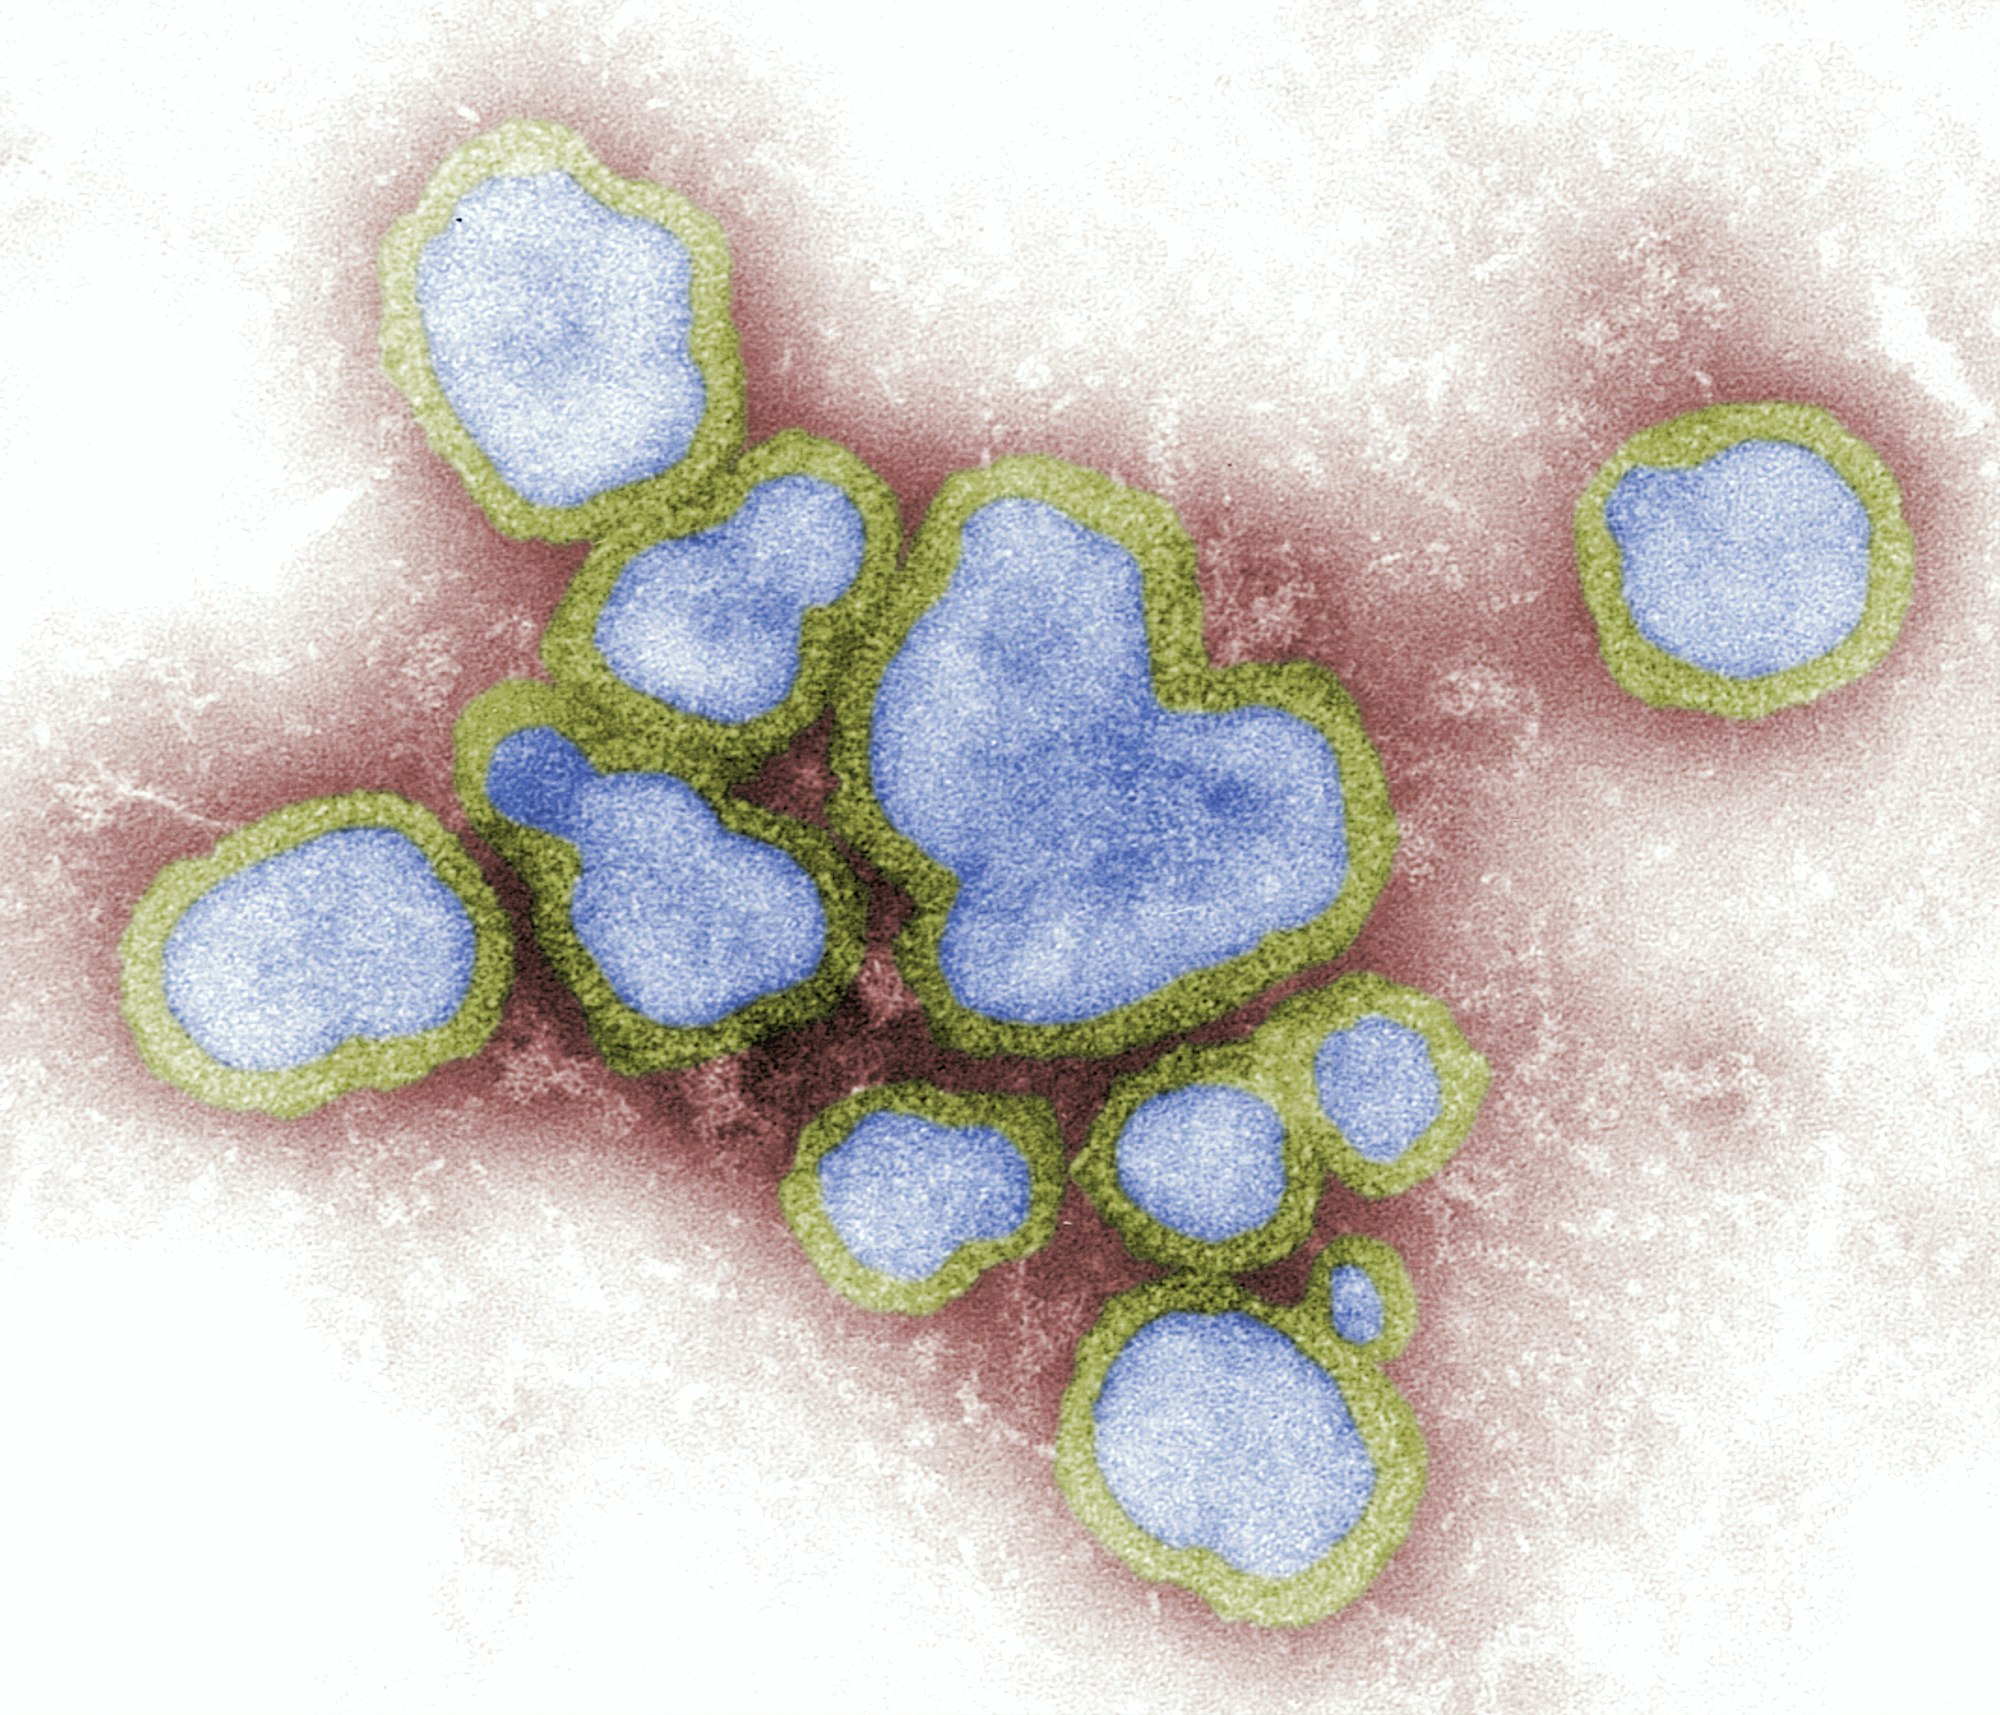 This digitally-colorized, negative-stained transmission electron microscopic (TEM) image depicted a number of Influenza A virions.